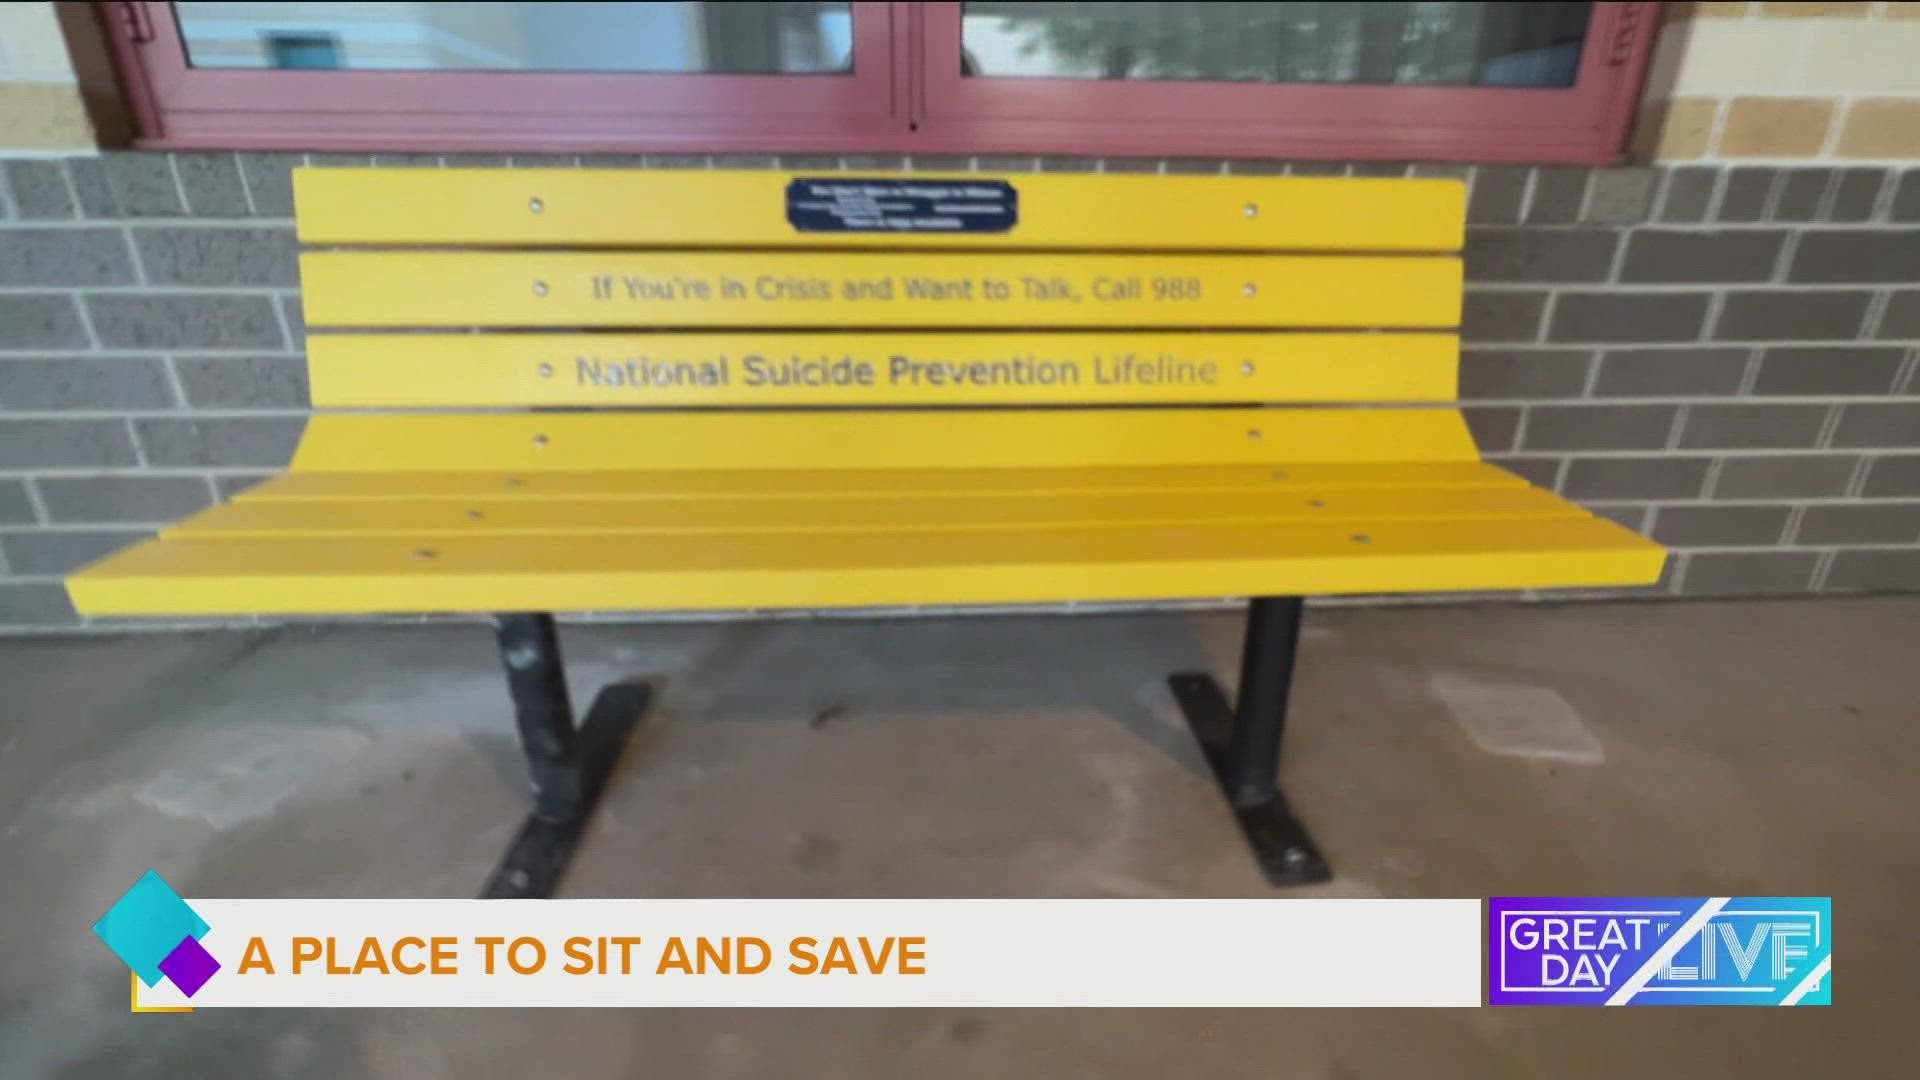 10 Tampa Bay and the TEGNA Foundation sponsor suicide prevention bench